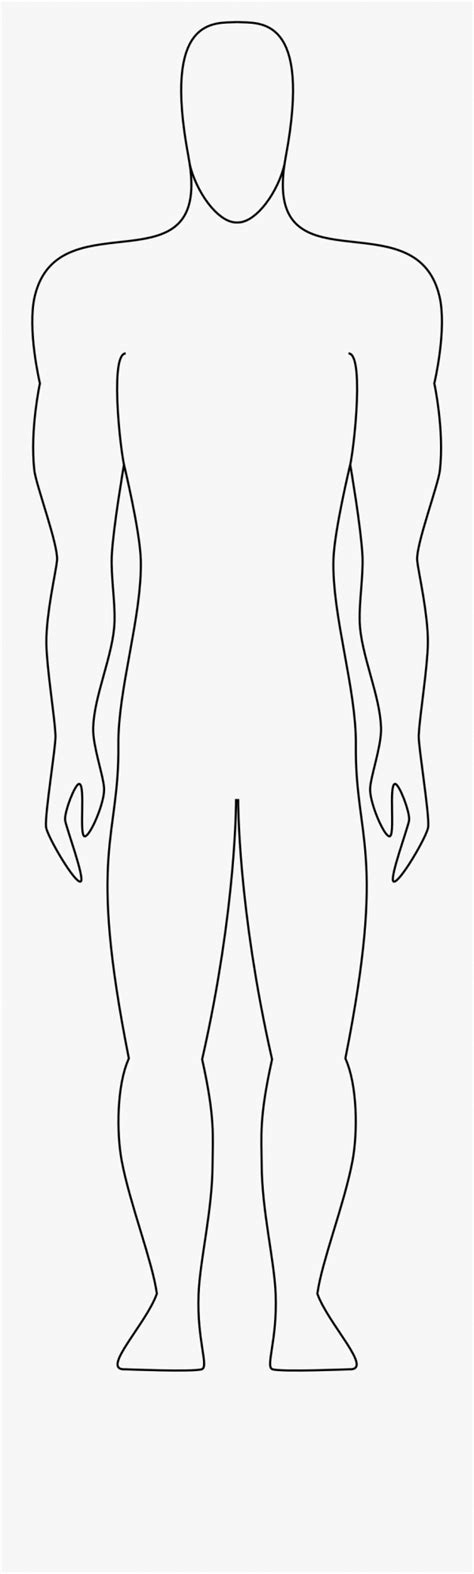 Body Outline Clipart Human And Other Clipart Images On Cliparts Pub™